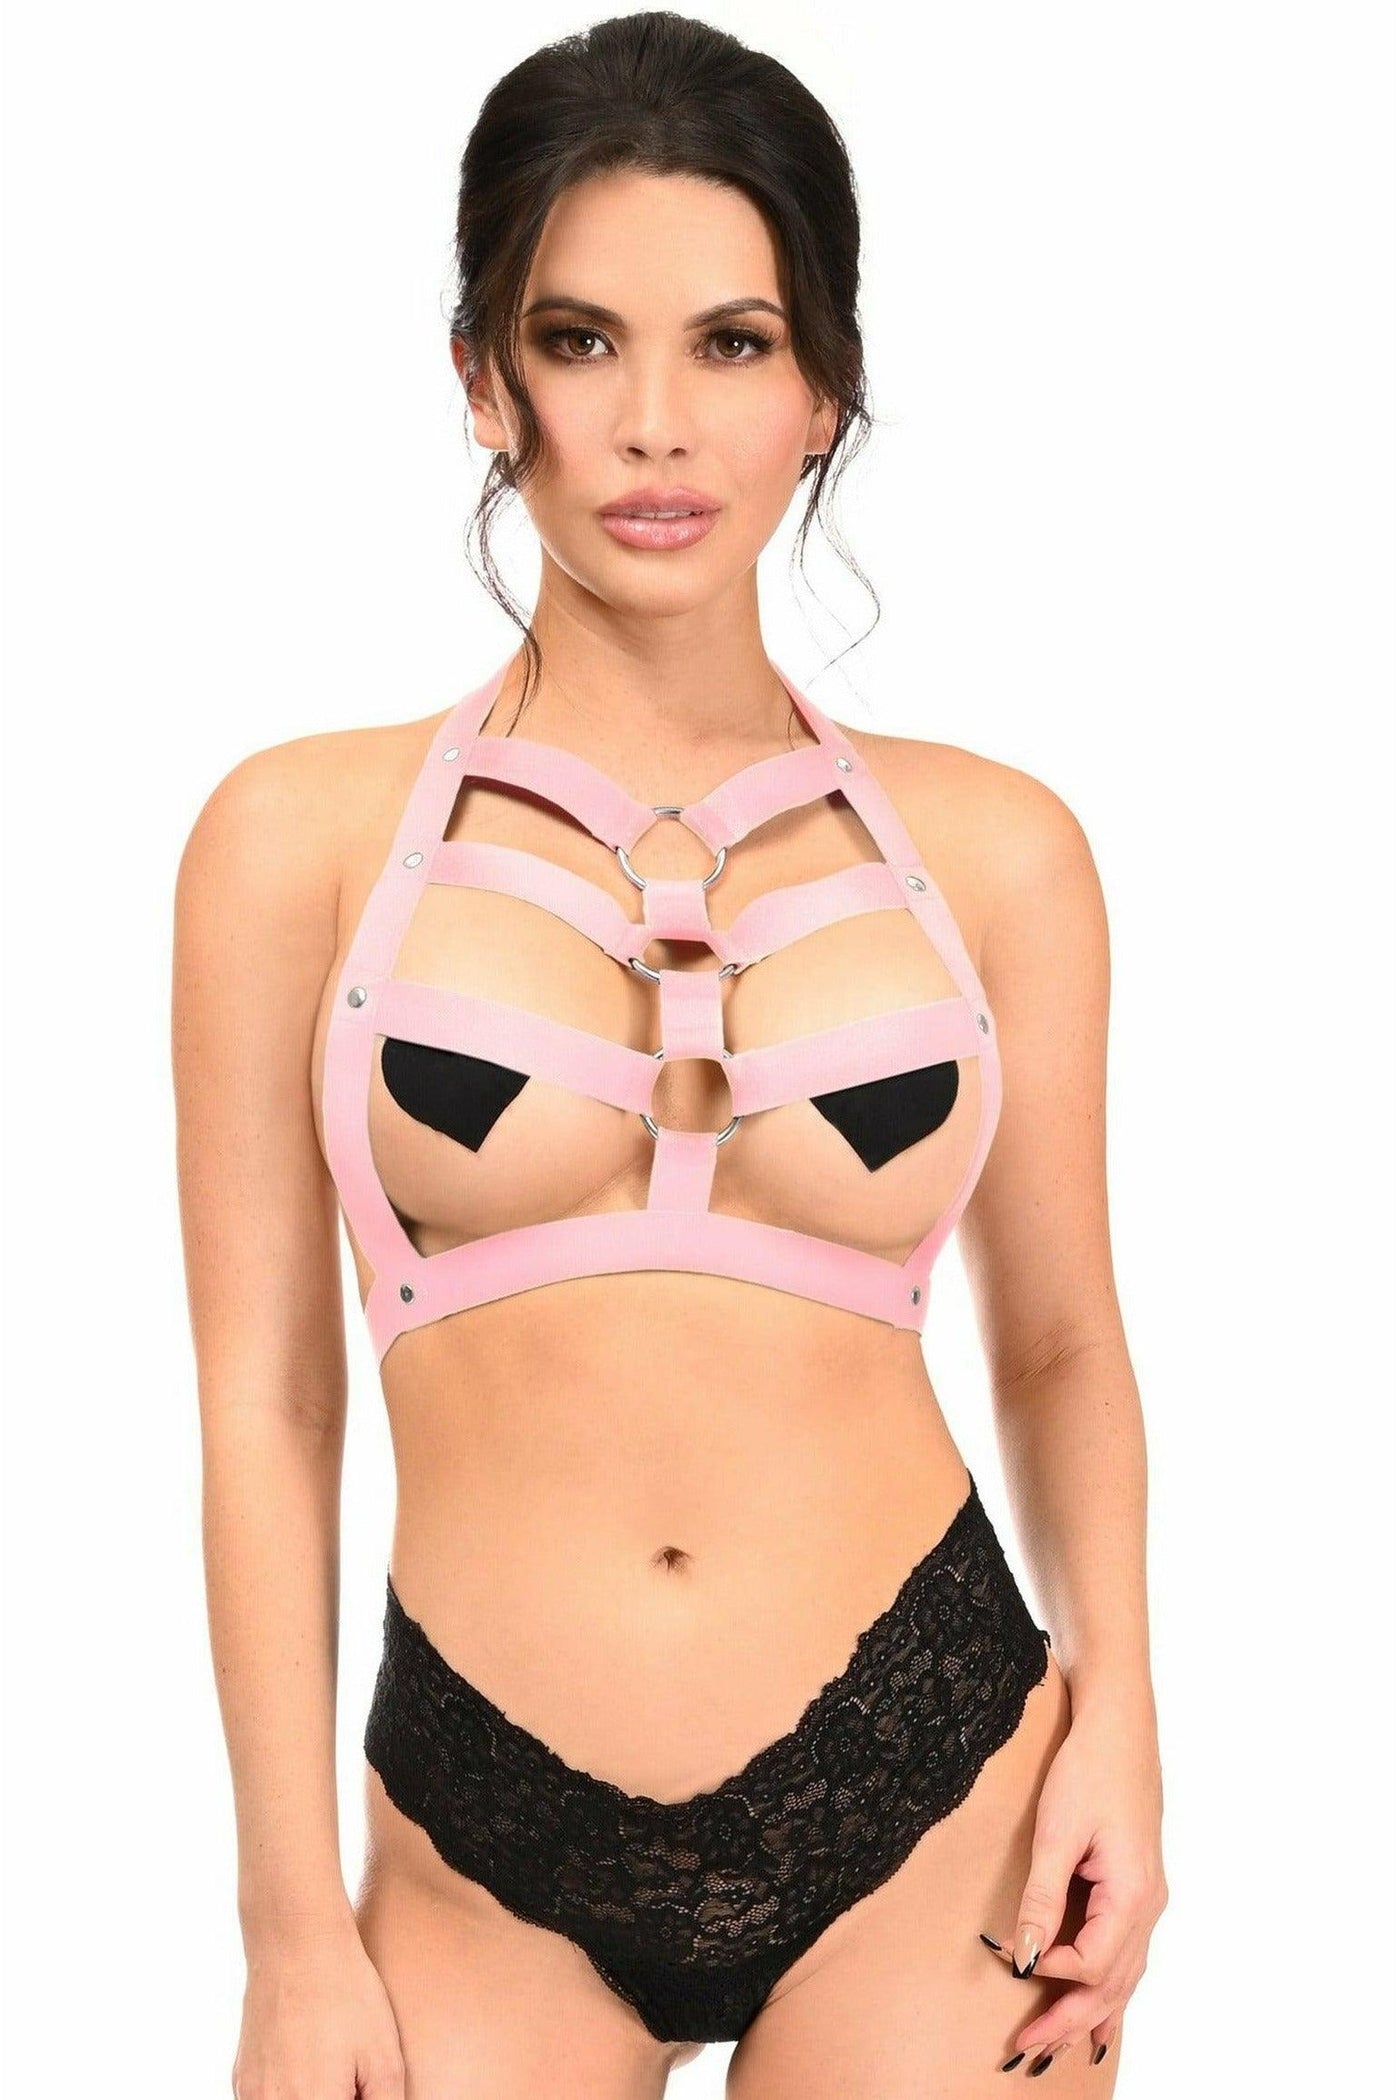 Lt Pink Stretchy Body Harness w/Silver Hardware - Daisy Corsets